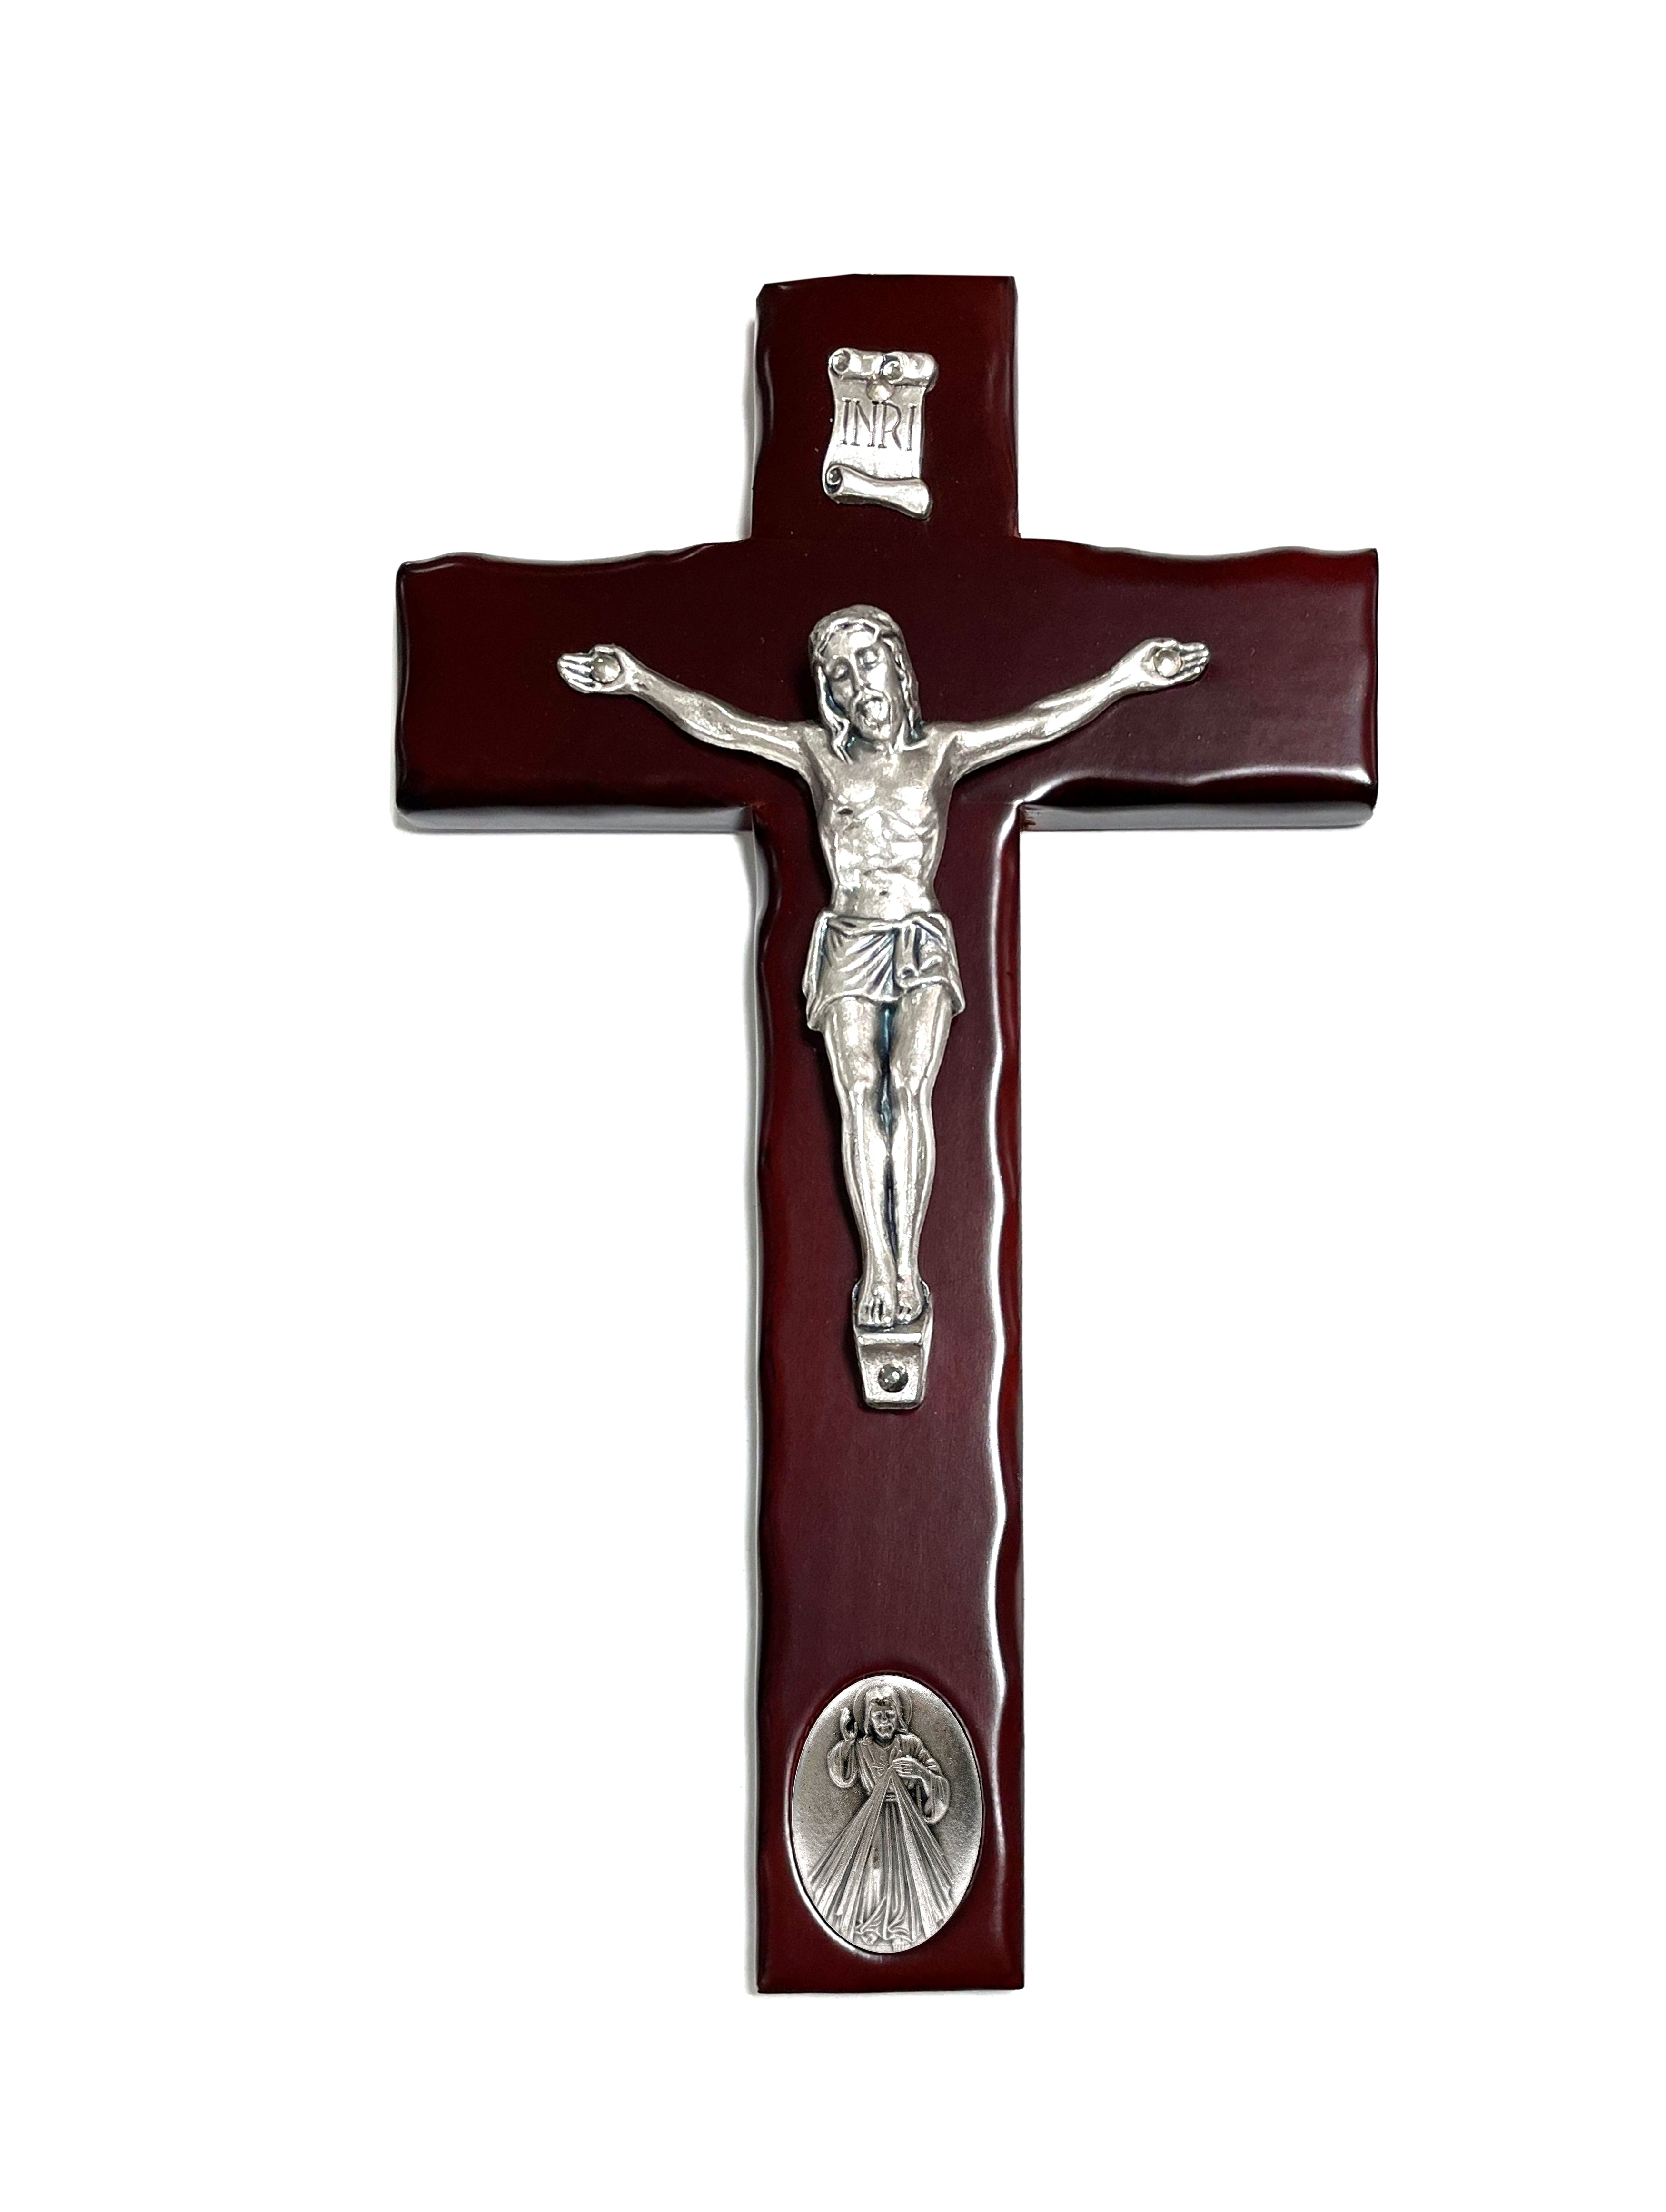 Brown wooden cross with silver medal